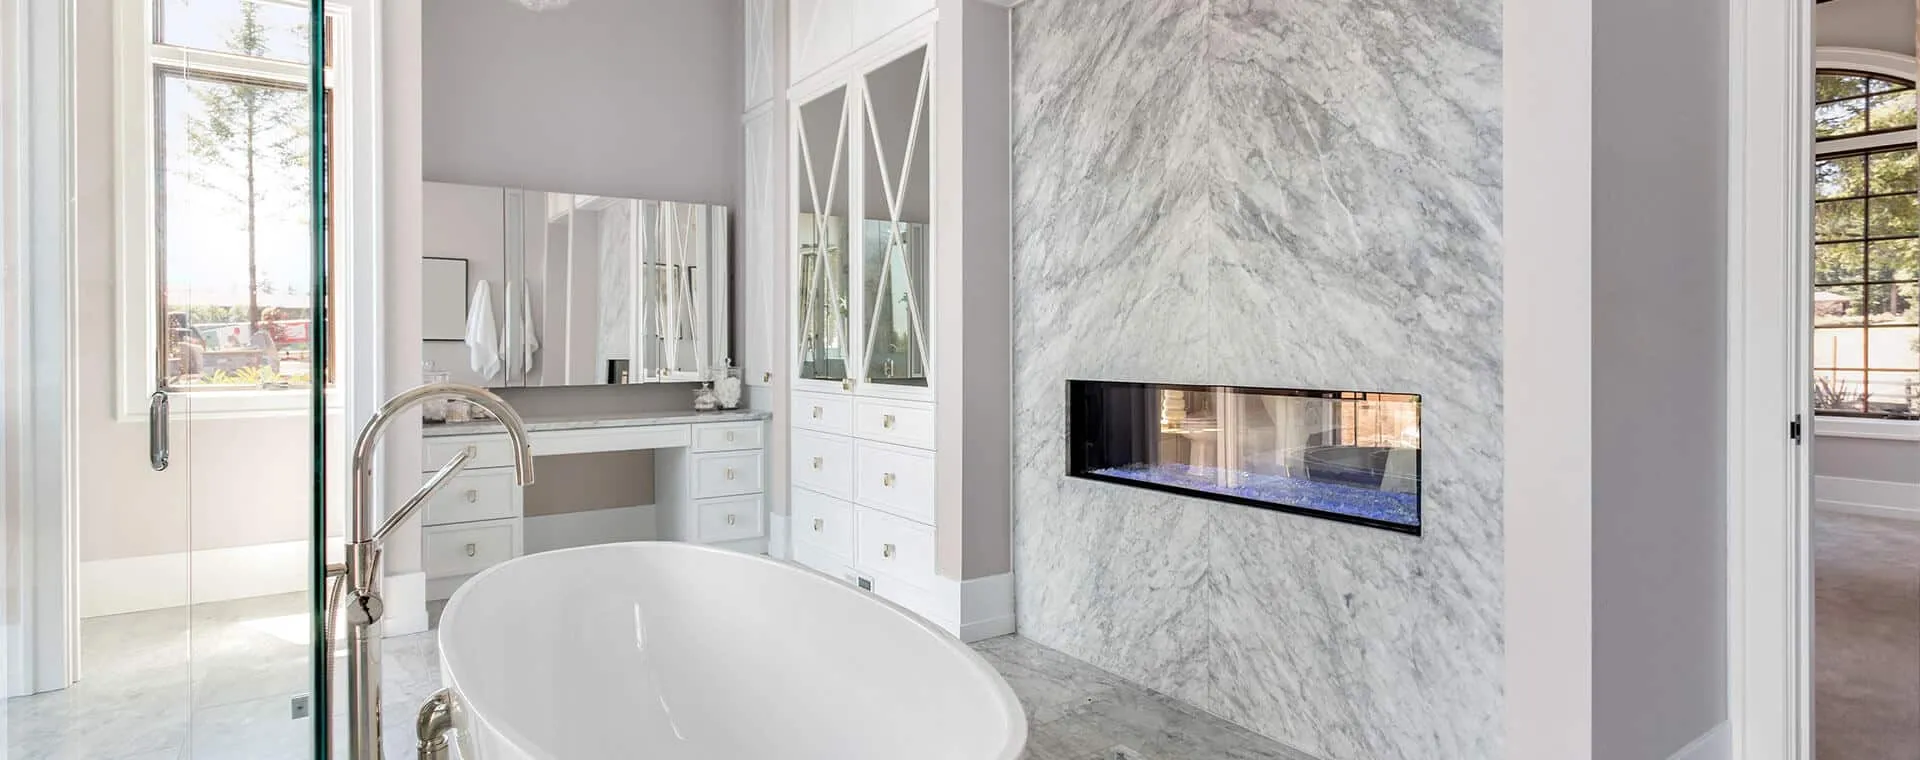 white marble for counters in bathroom indoors with bathtub with design in Italian marble flooring